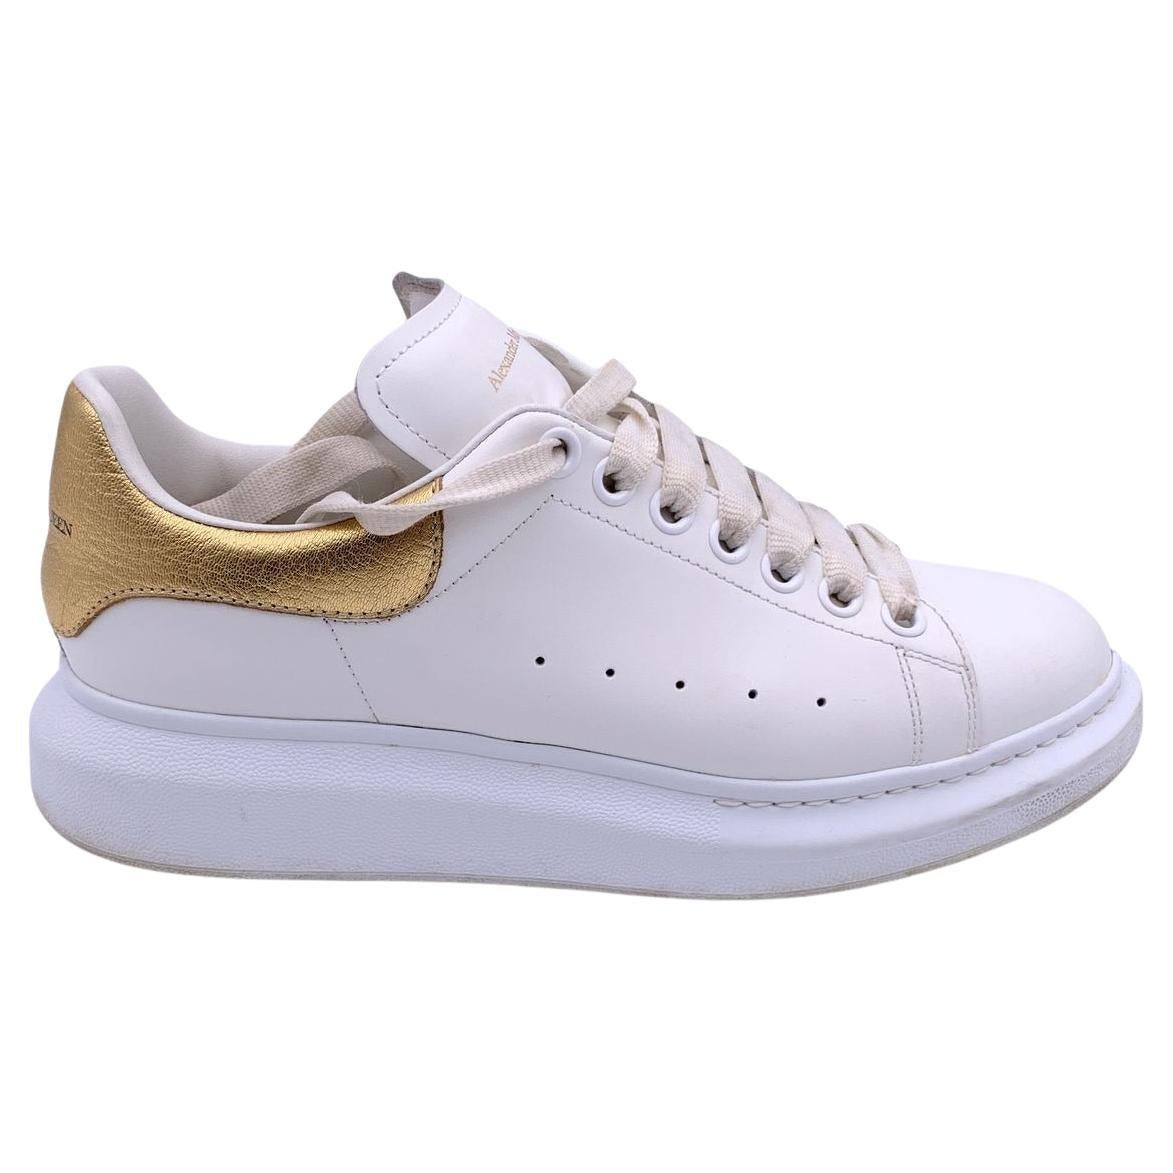 Alexander McQueen White Gold Lace Up Sneakers Shoes Size 40 For Sale